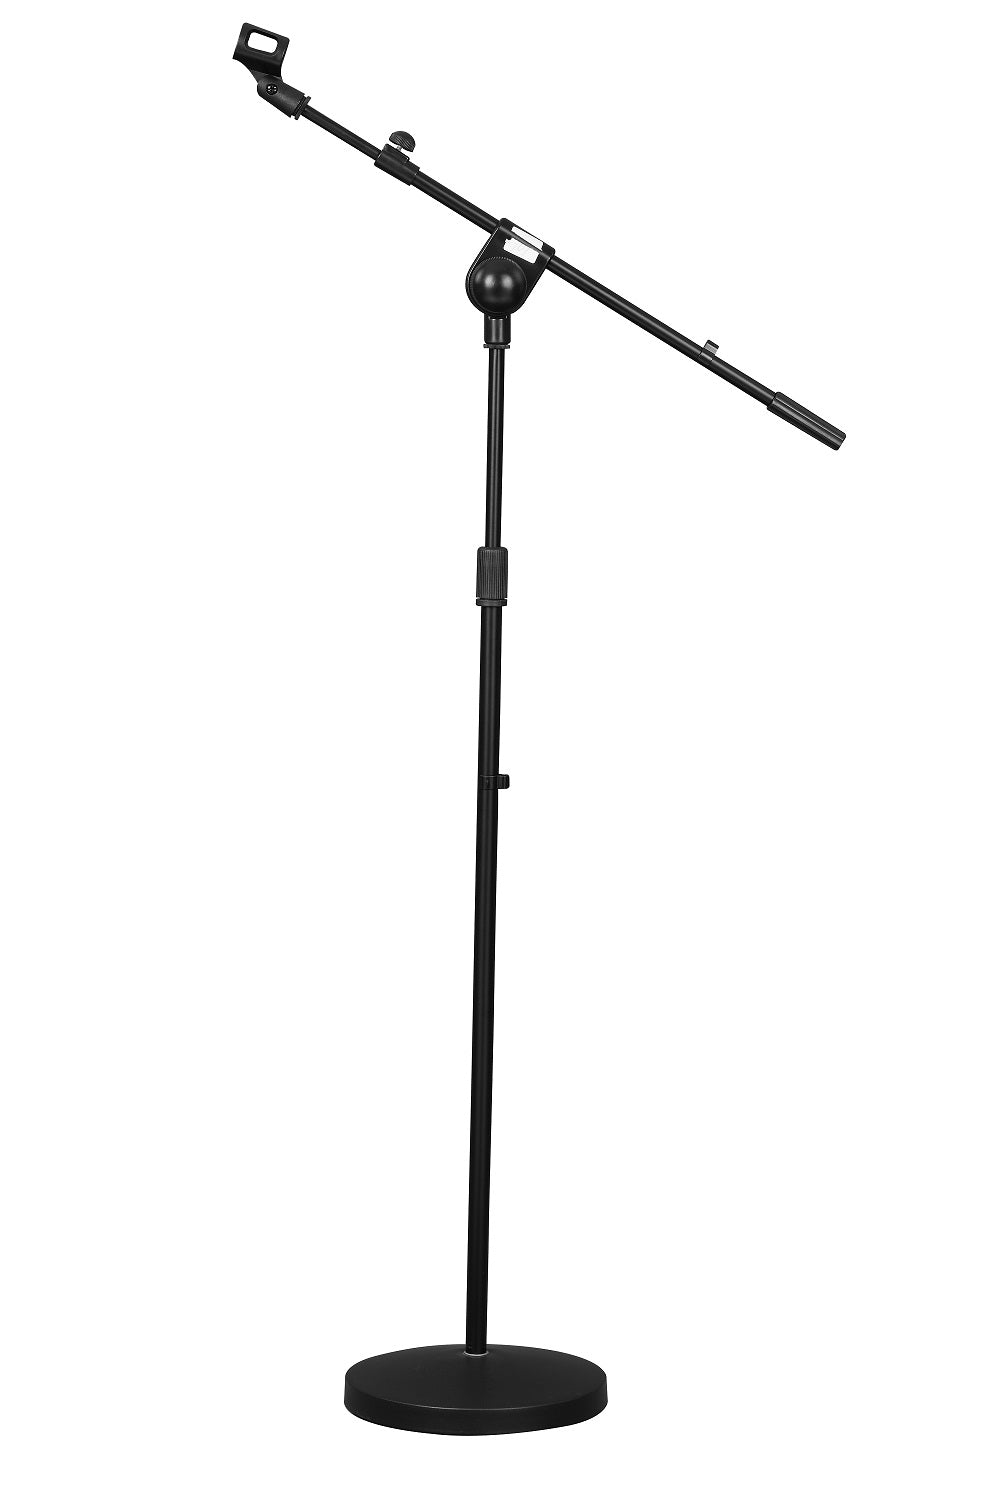 96-3302 Adjustable Round Base Microphone Stand